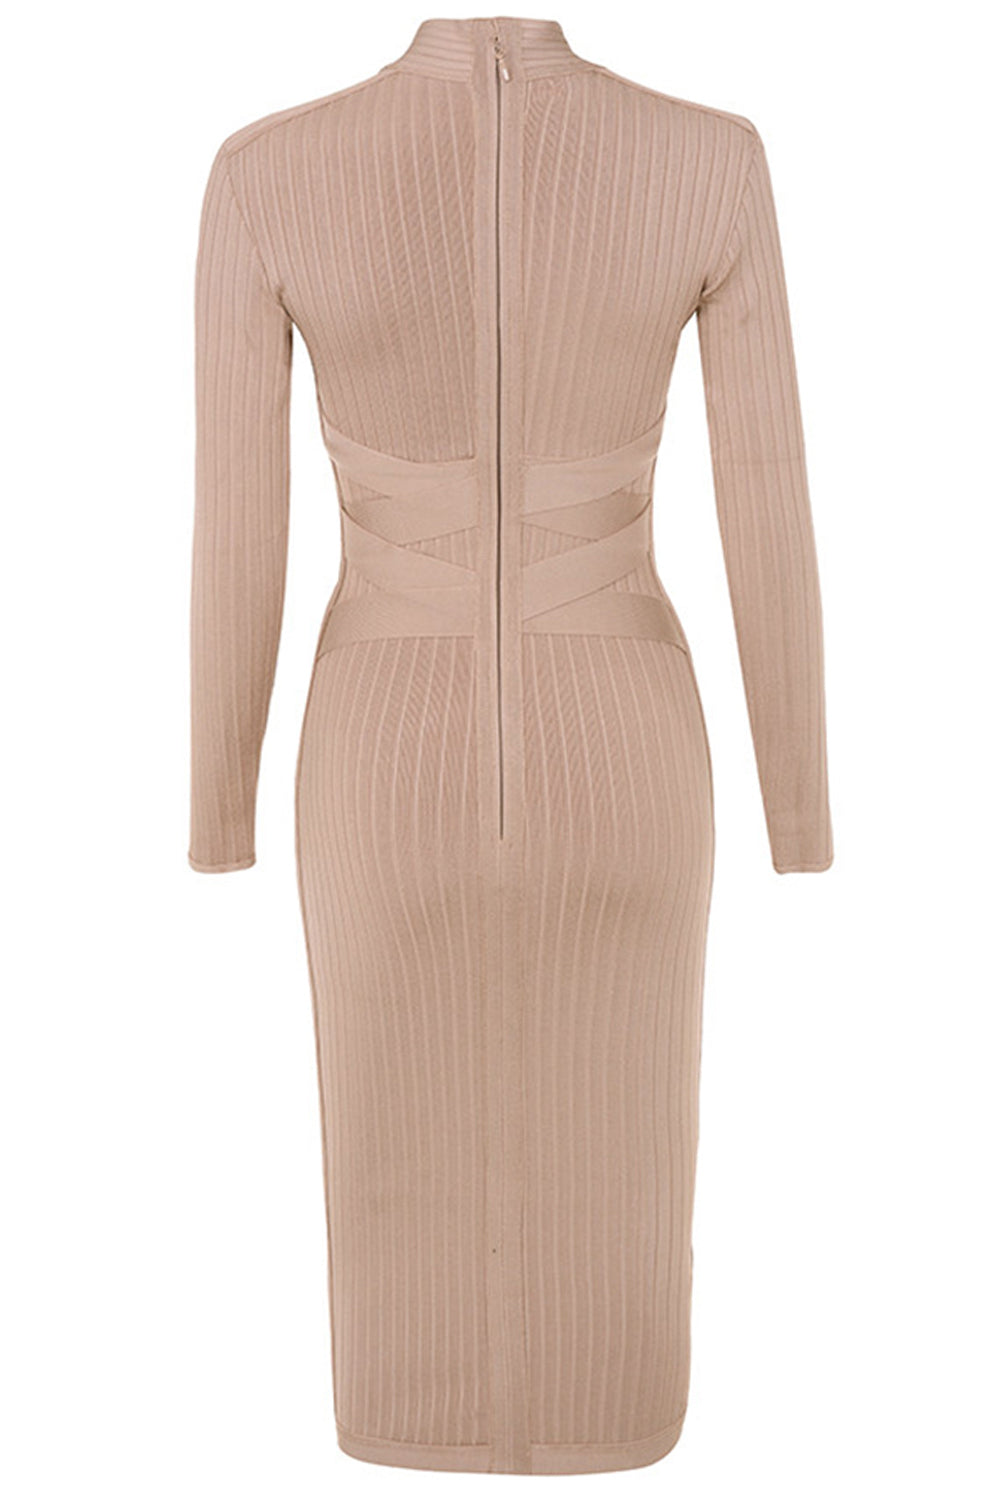 nude bandage dress, nude bodycon dress, cocktail dress, bandage dress for women, feather bandage dress, knee length bandage dress, long sleeve bandage dress, event dress, party dress, high neck bandage dress, stripe bandage dress